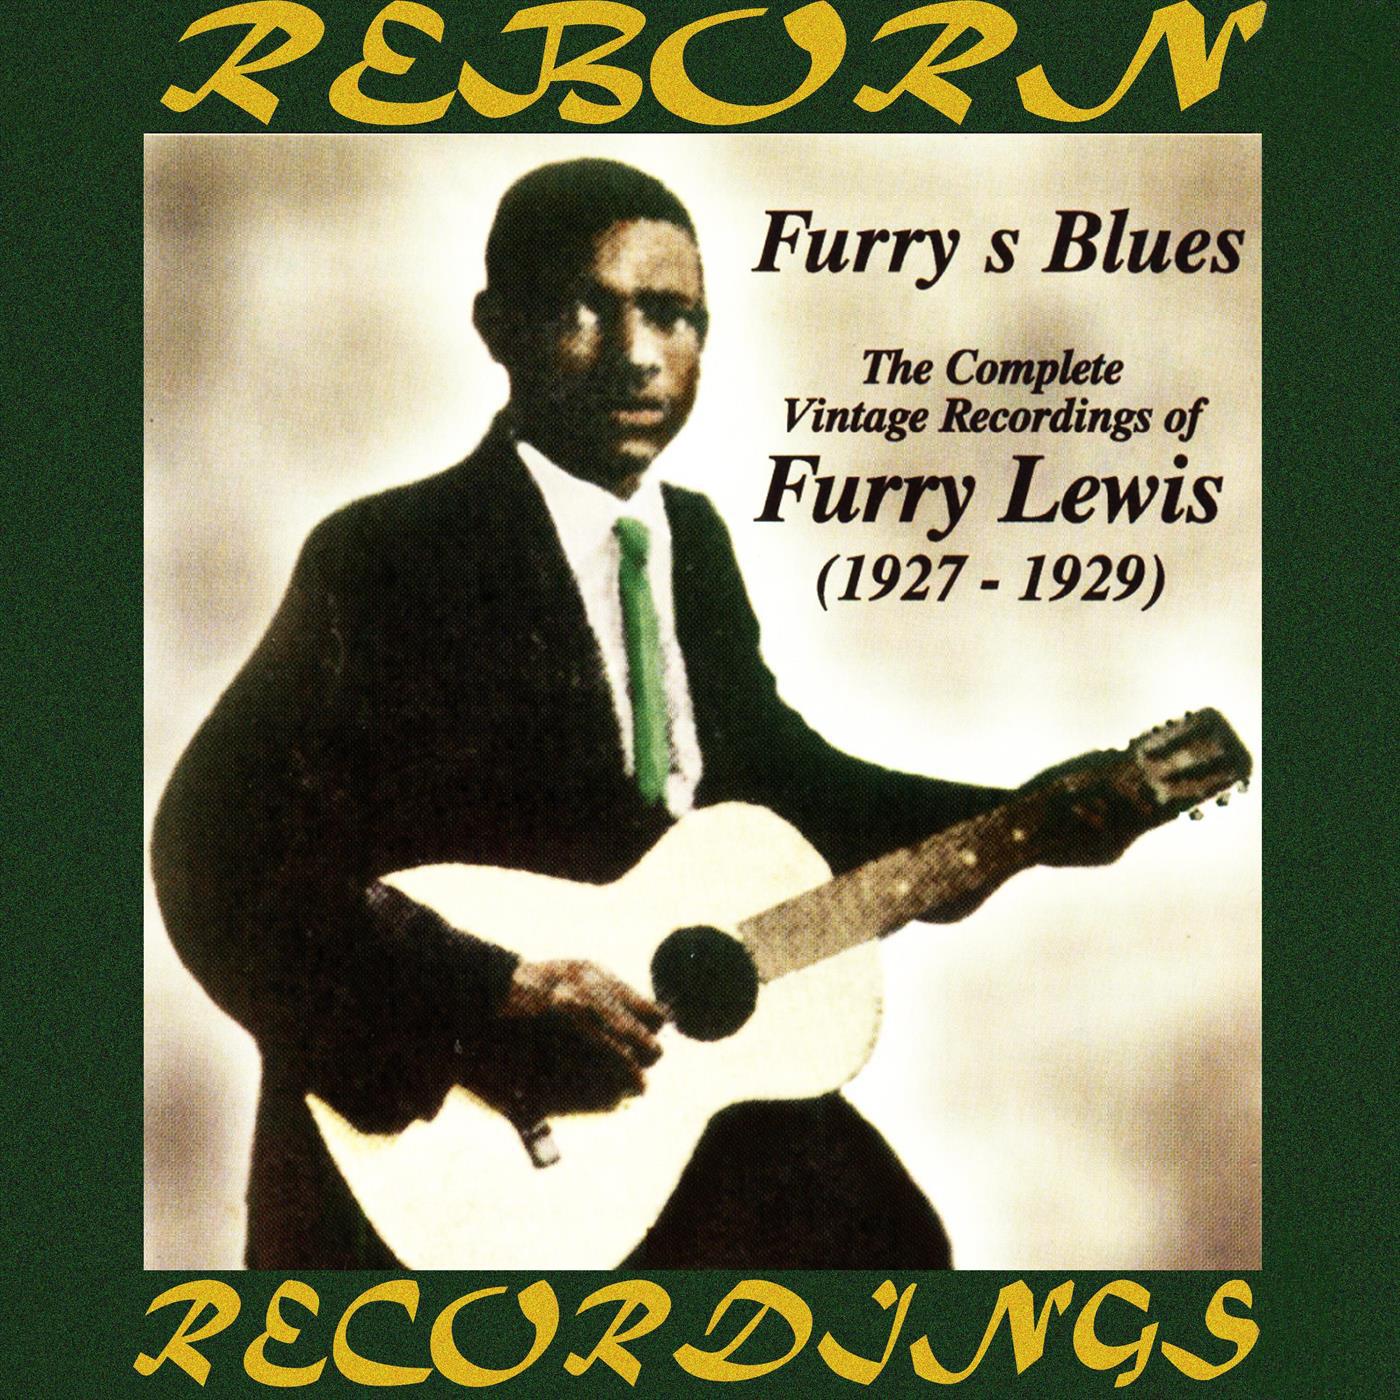 Complete Vintage Recordings of Furry Lewis 1927-1929 (HD Remastered)